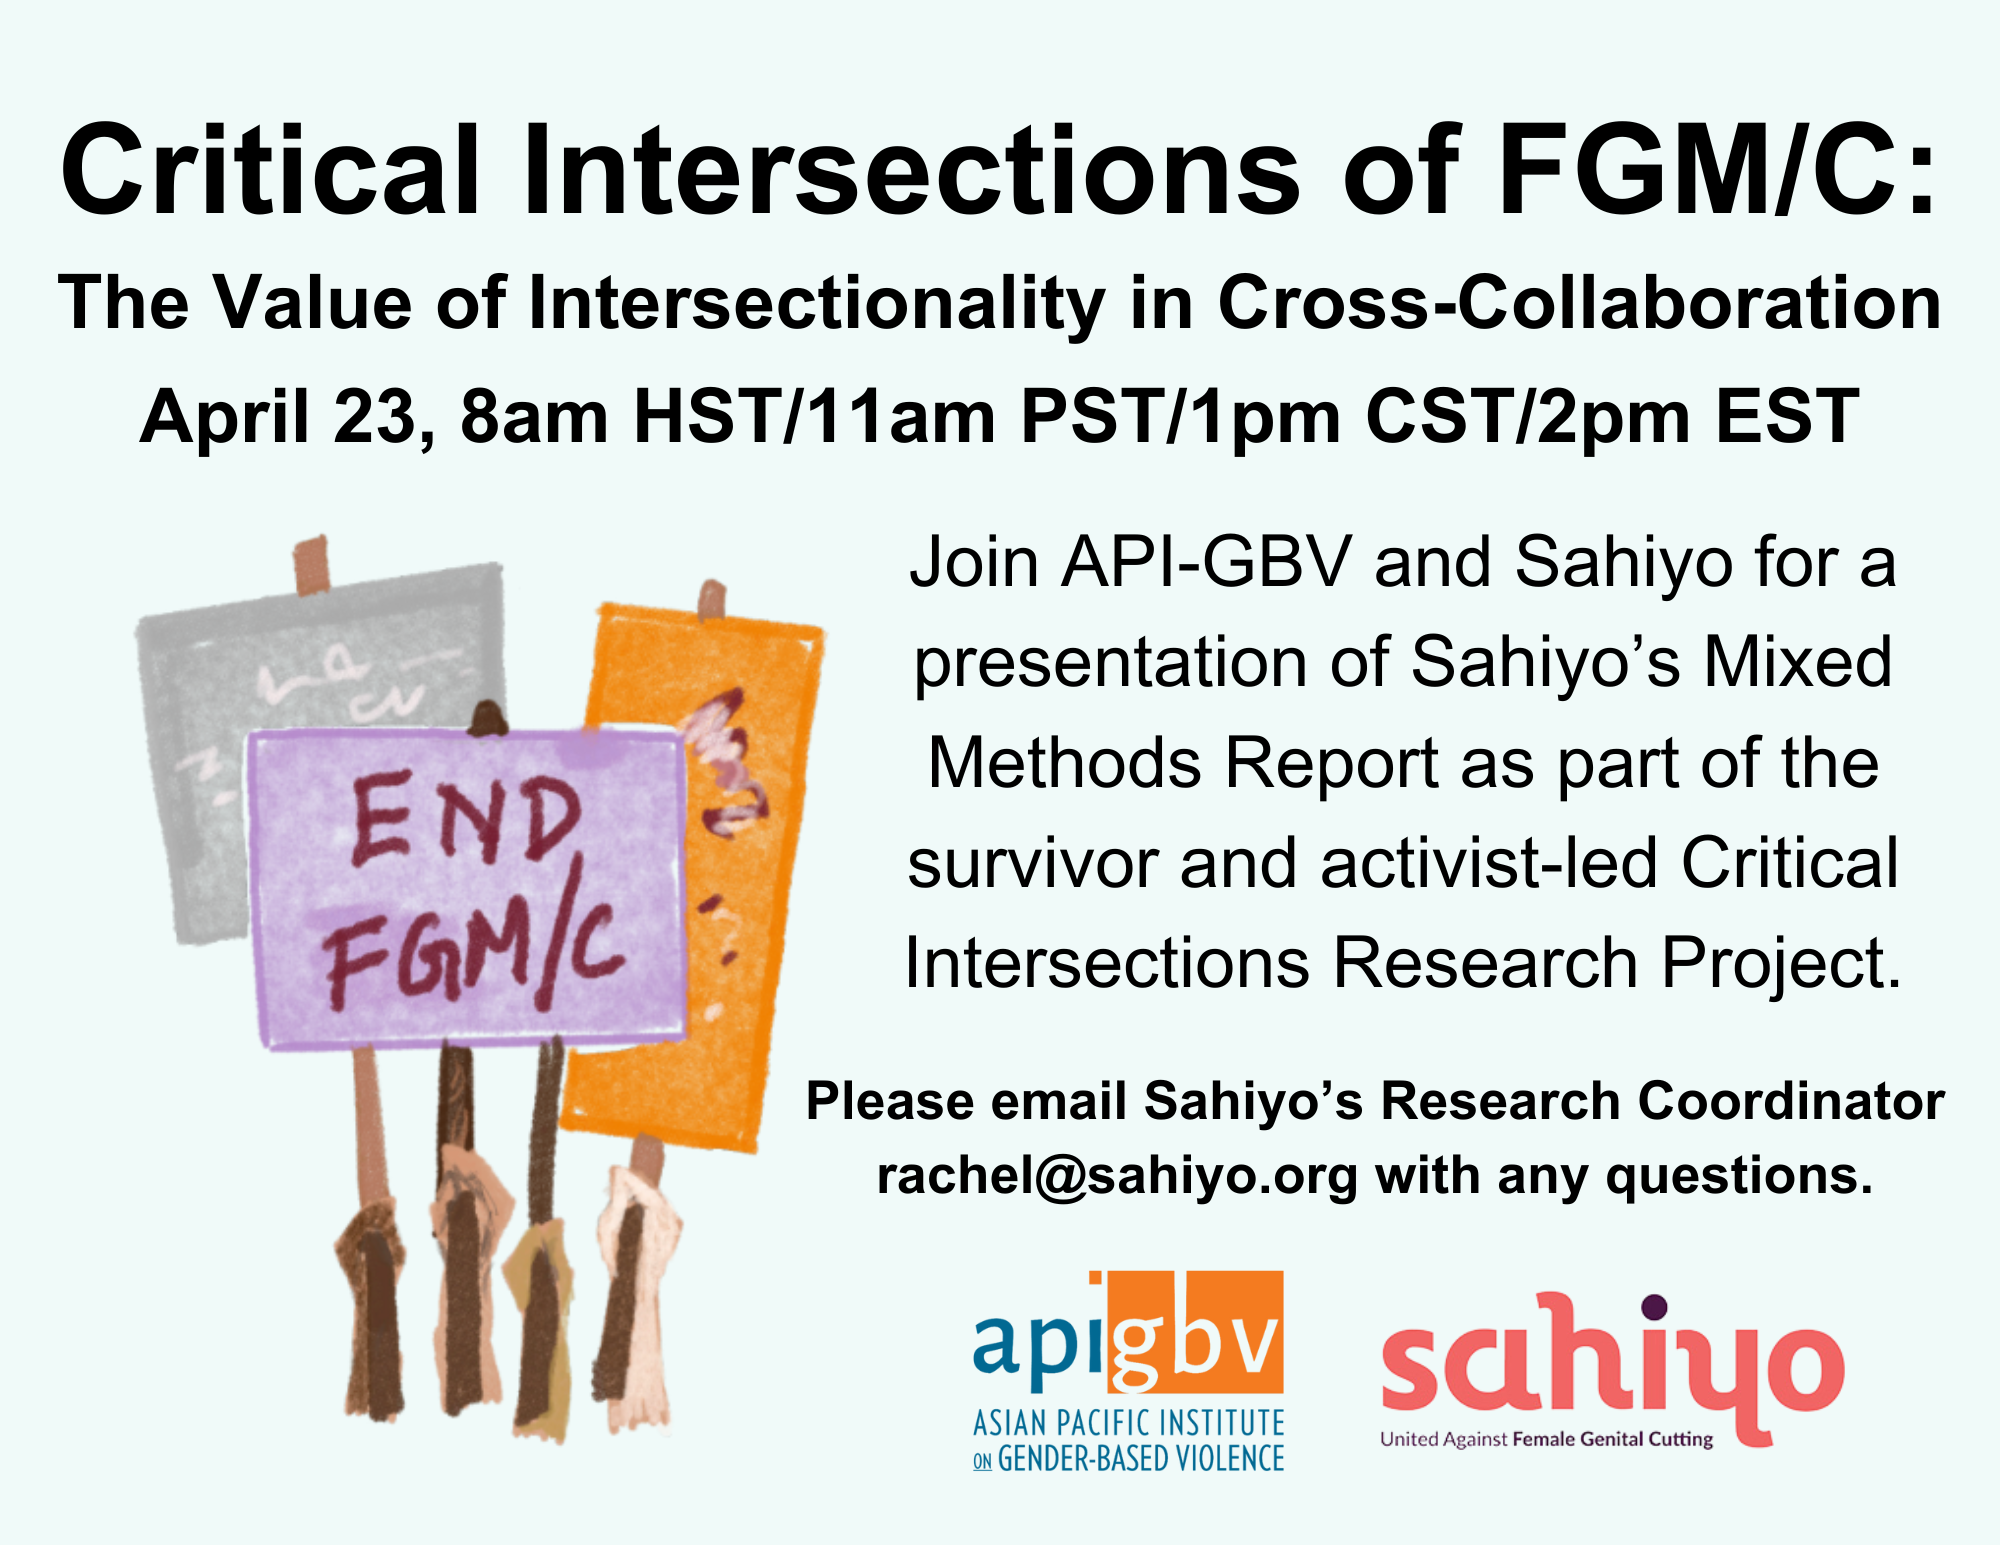 Critical Intersections of FGM/C: The Value of Intersectionality in Cross-Collaboration Webinar